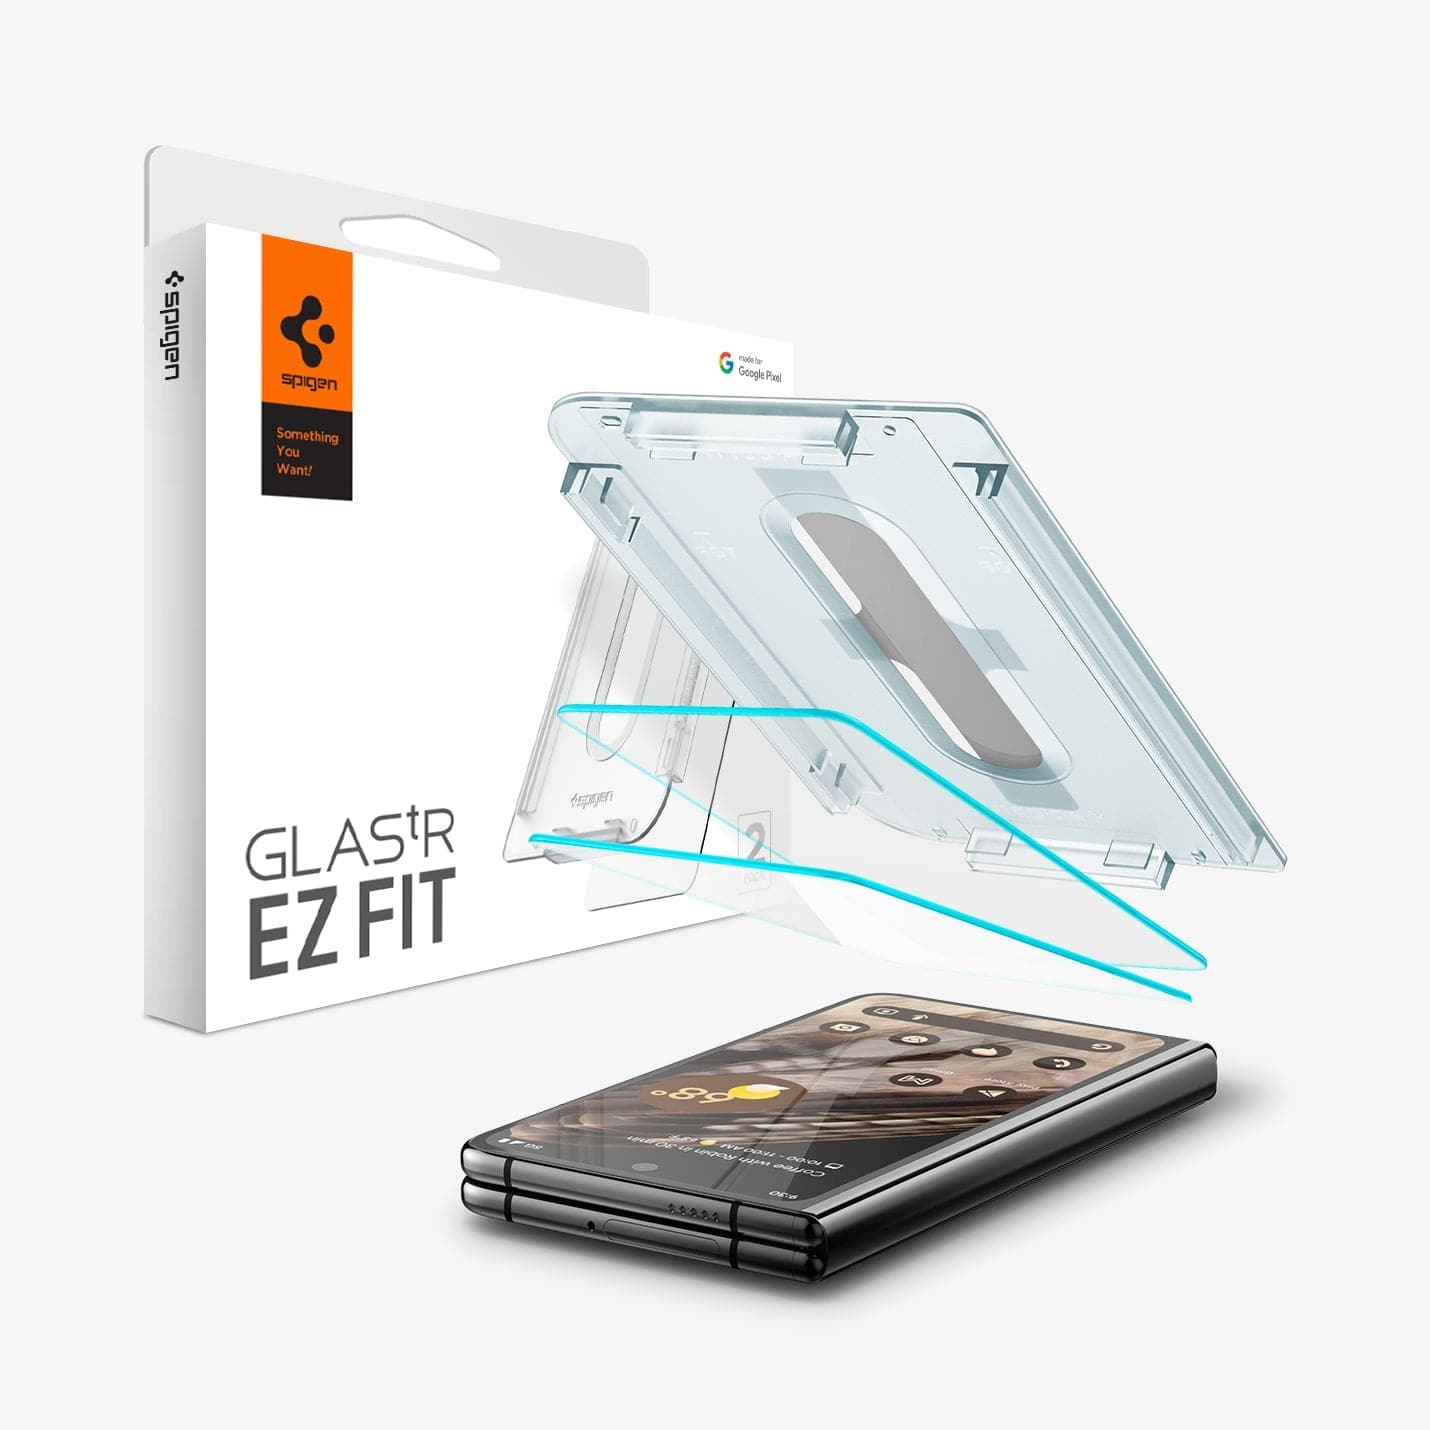 AGL06200 - Pixel Fold Series GLAS.tR EZ Fit Screen Protector showing the device, two screen protectors, ez fit tray and packaging